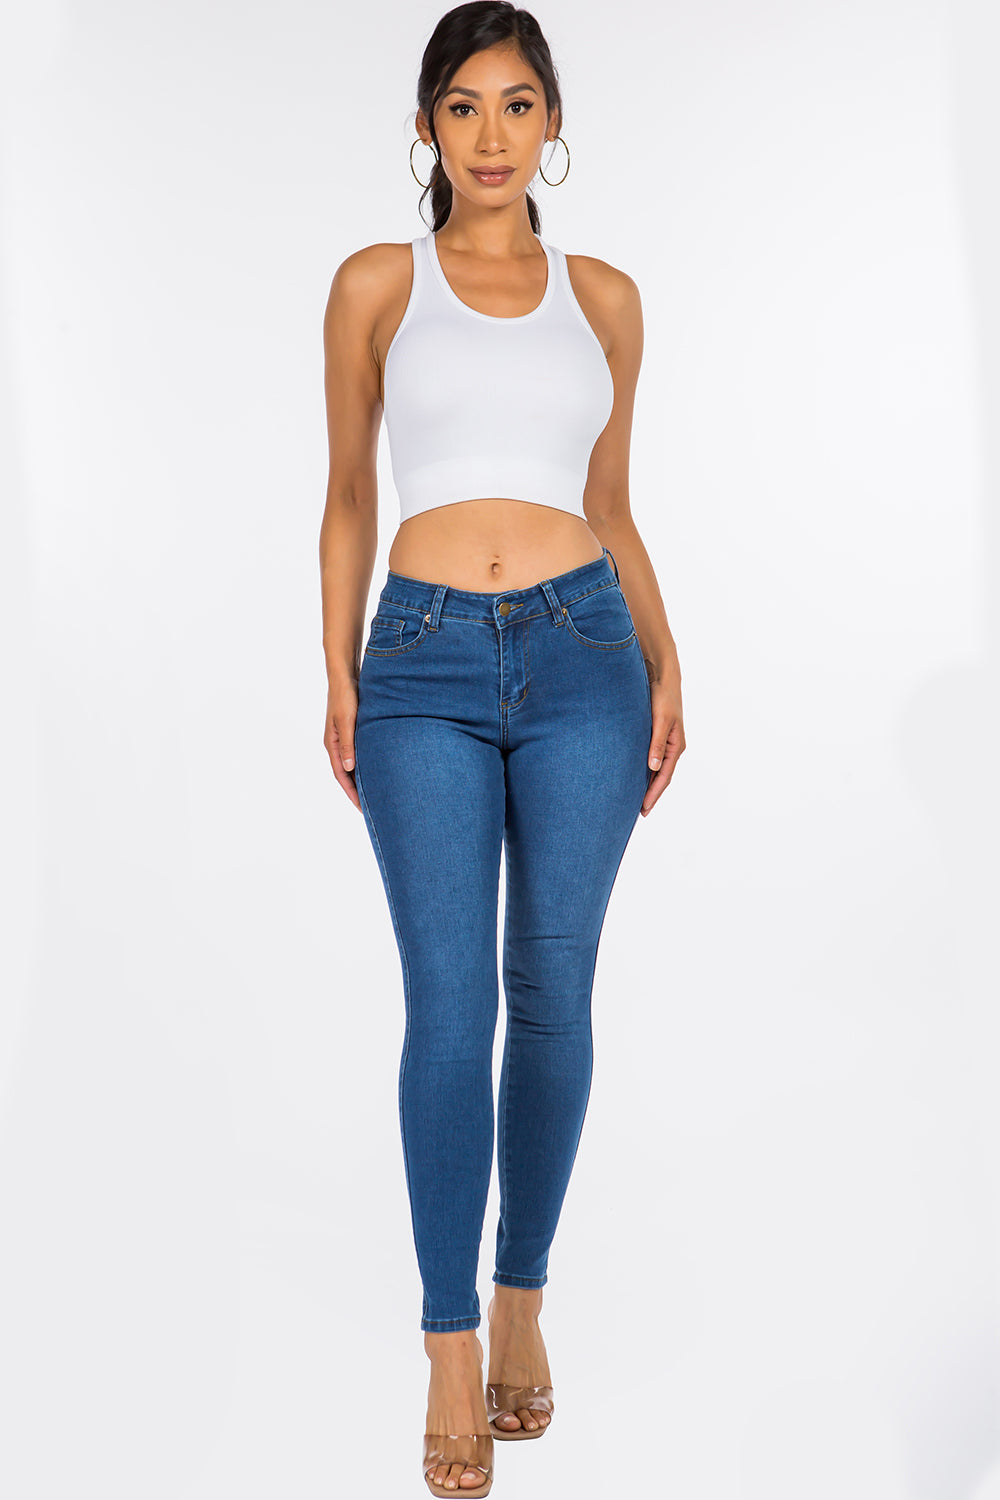 Wholesale Classic Mid Rise Skinny Jeans WR3702 @ Blue Turtle Jeans – BLUE  TURTLE | Stretchjeans